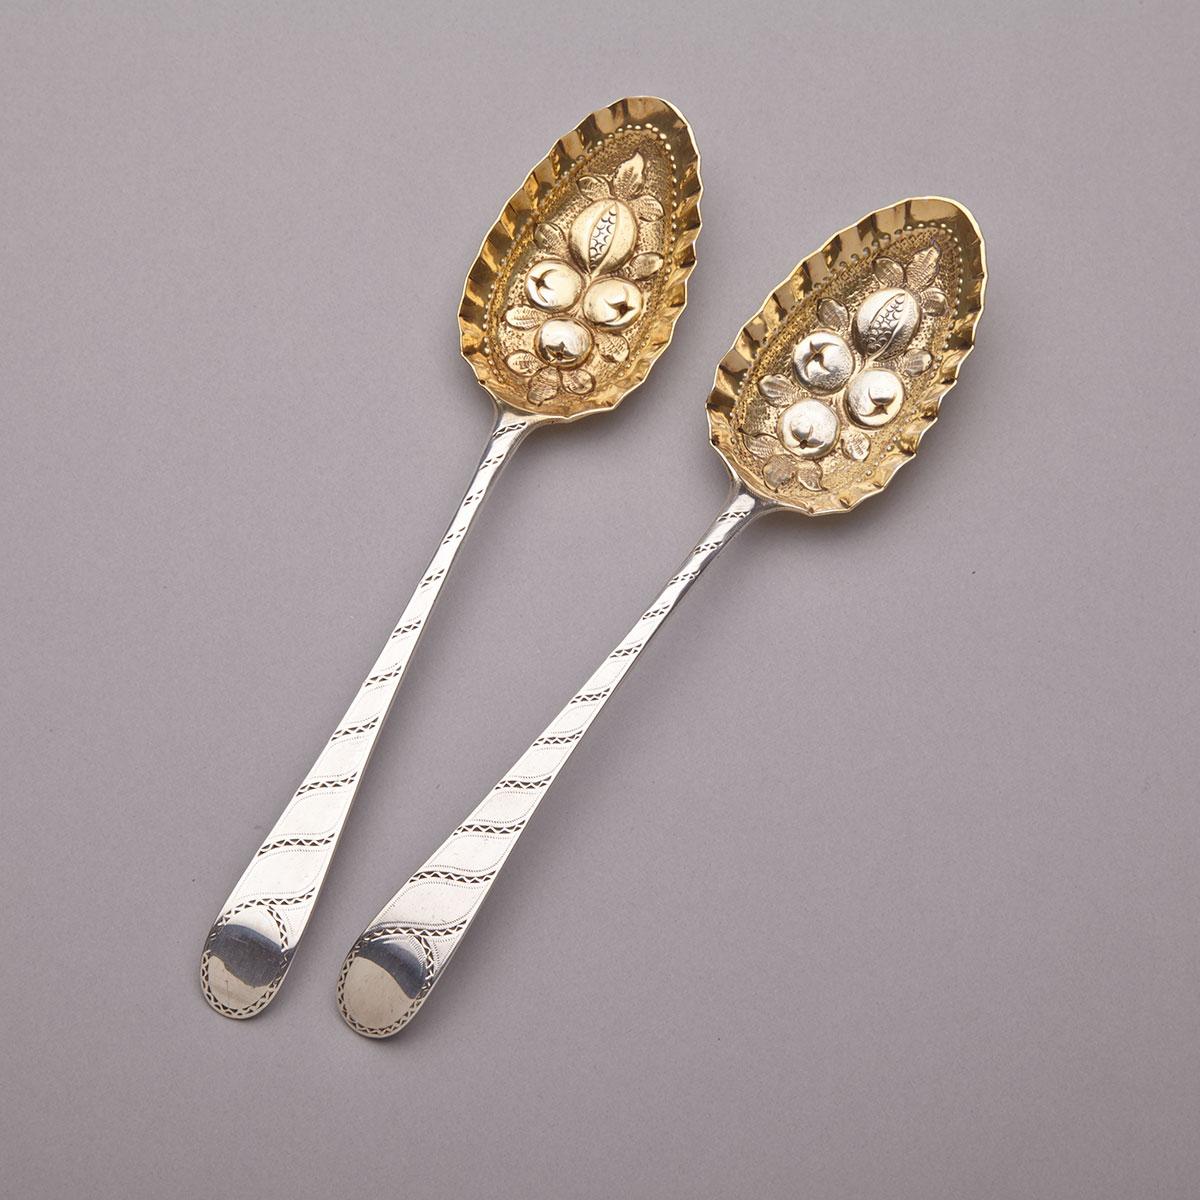 Pair of George III Silver Bright-Cut Engraved Old English Pattern Berry Spoons, Hester Bateman, London, 1782